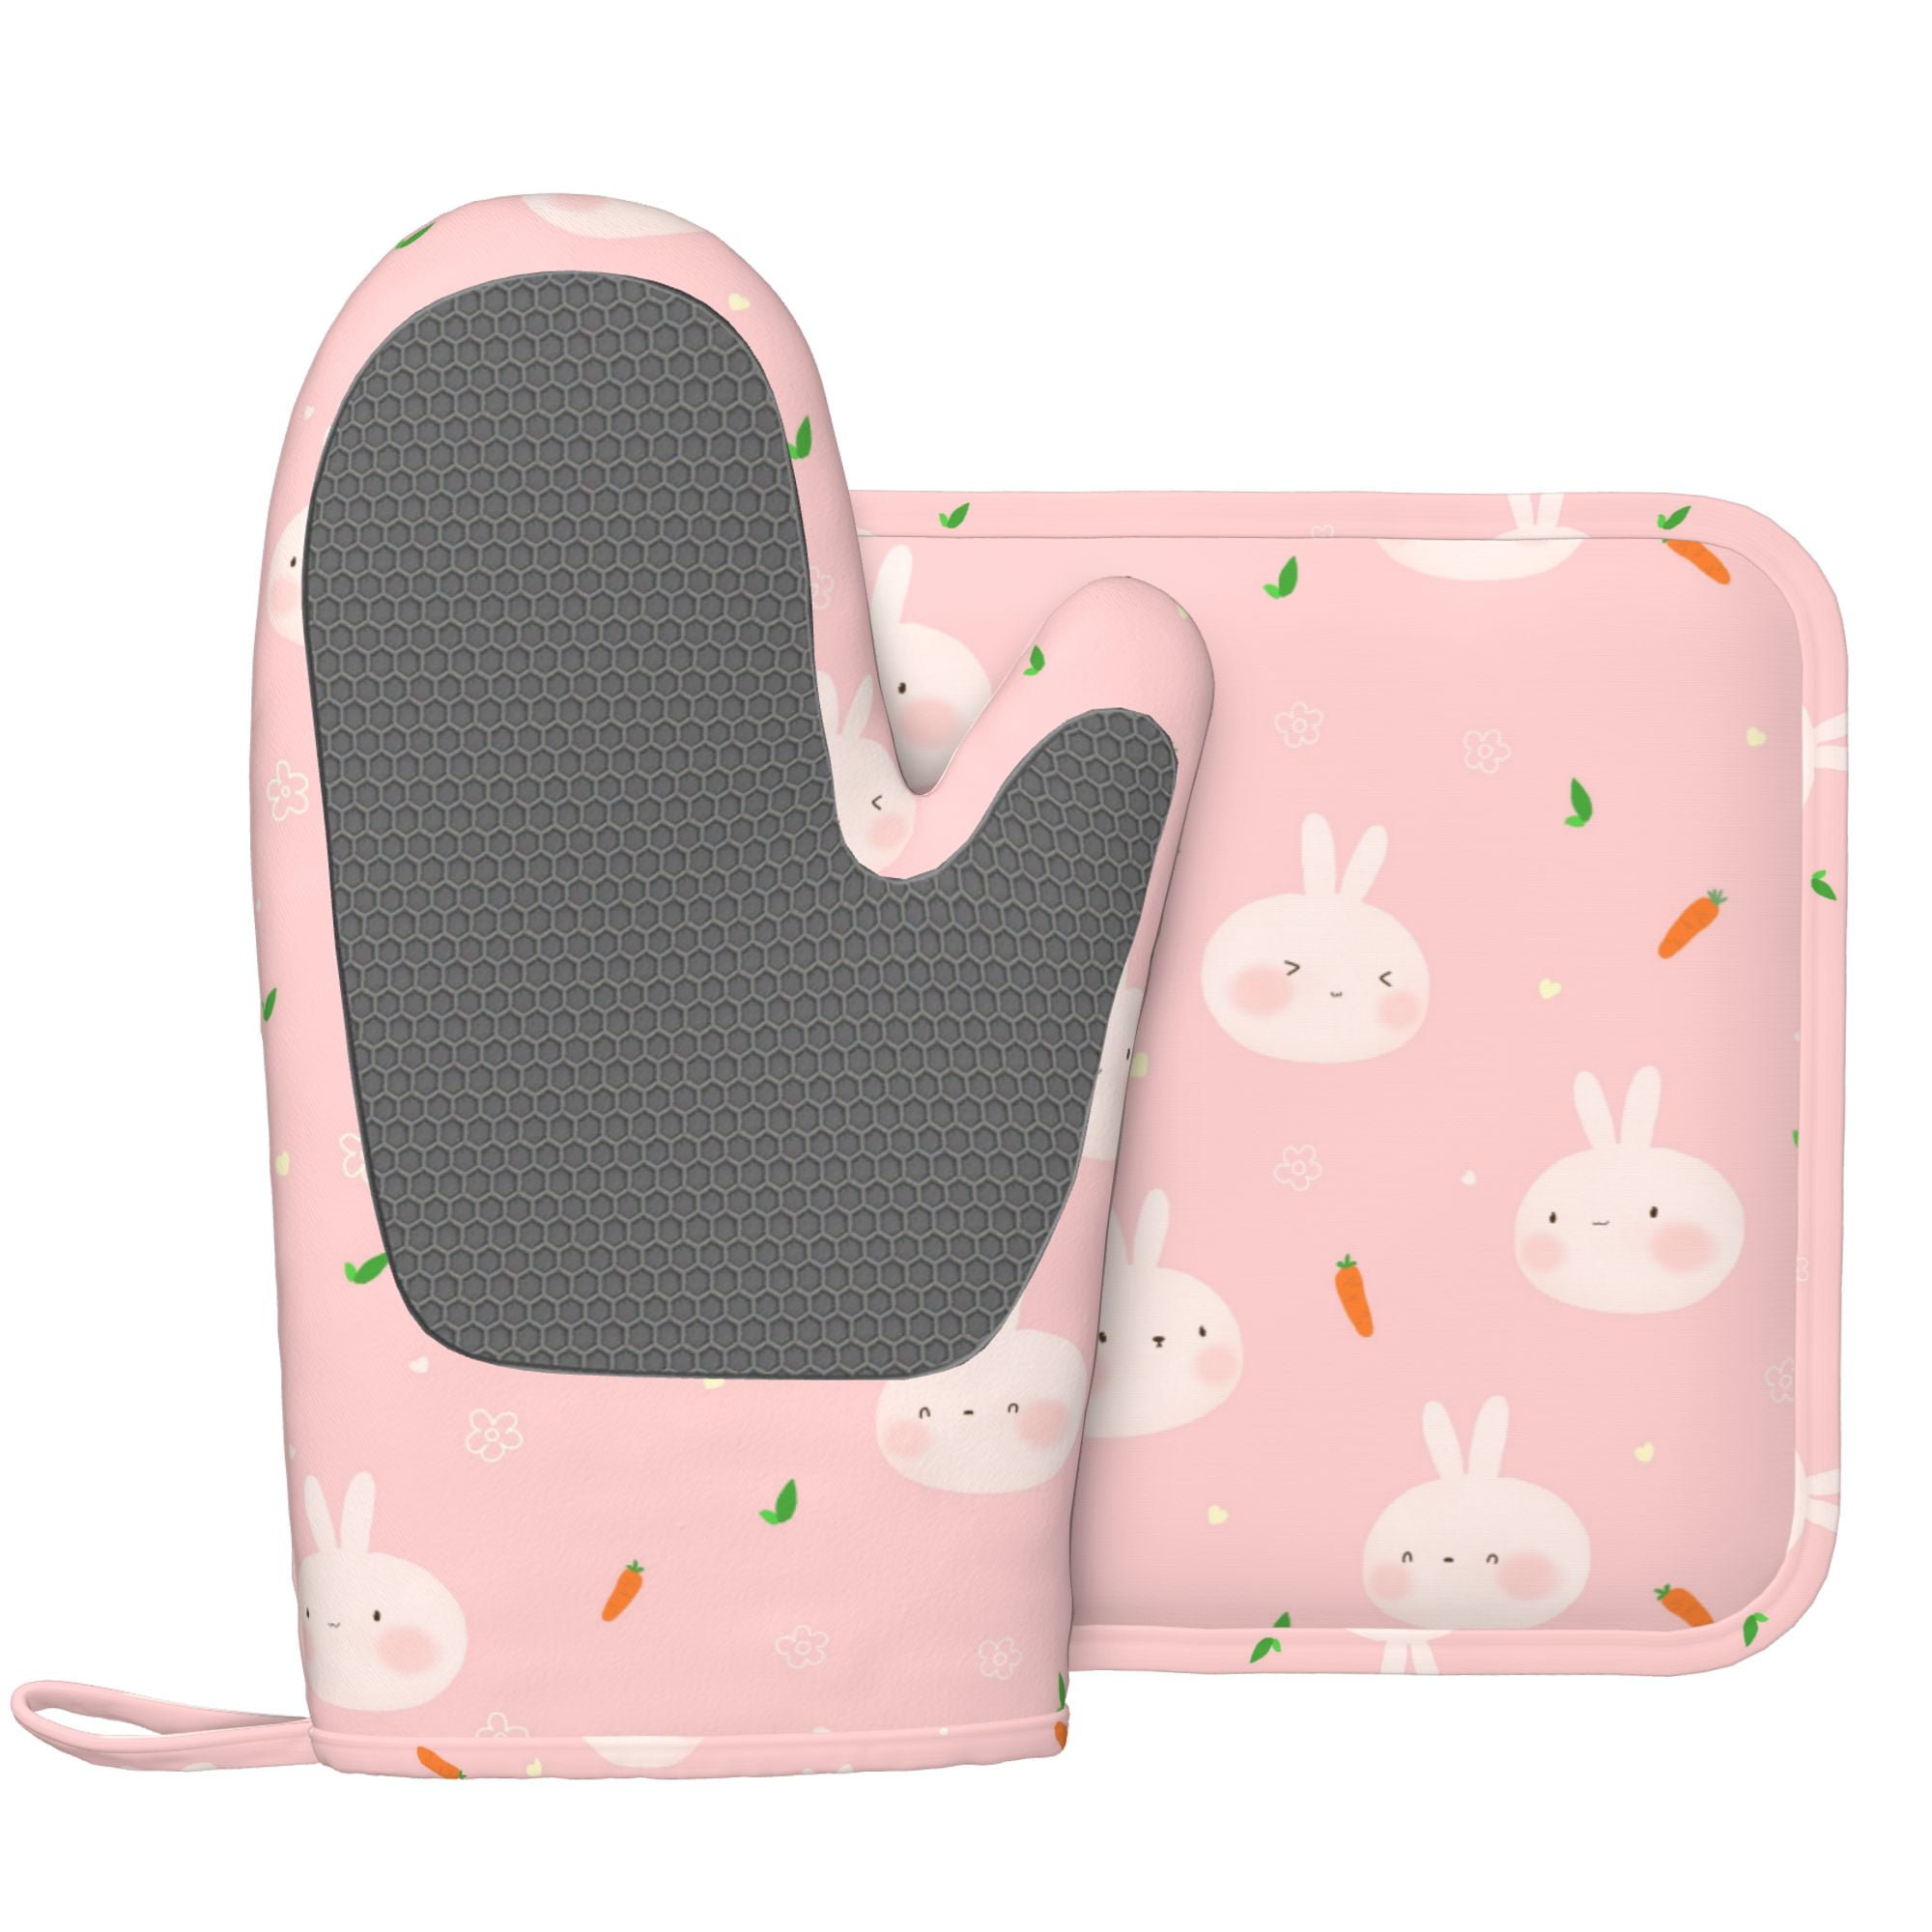 Cute Princess Llama Oven Mitts and Pot Holders Sets Heat Resistant